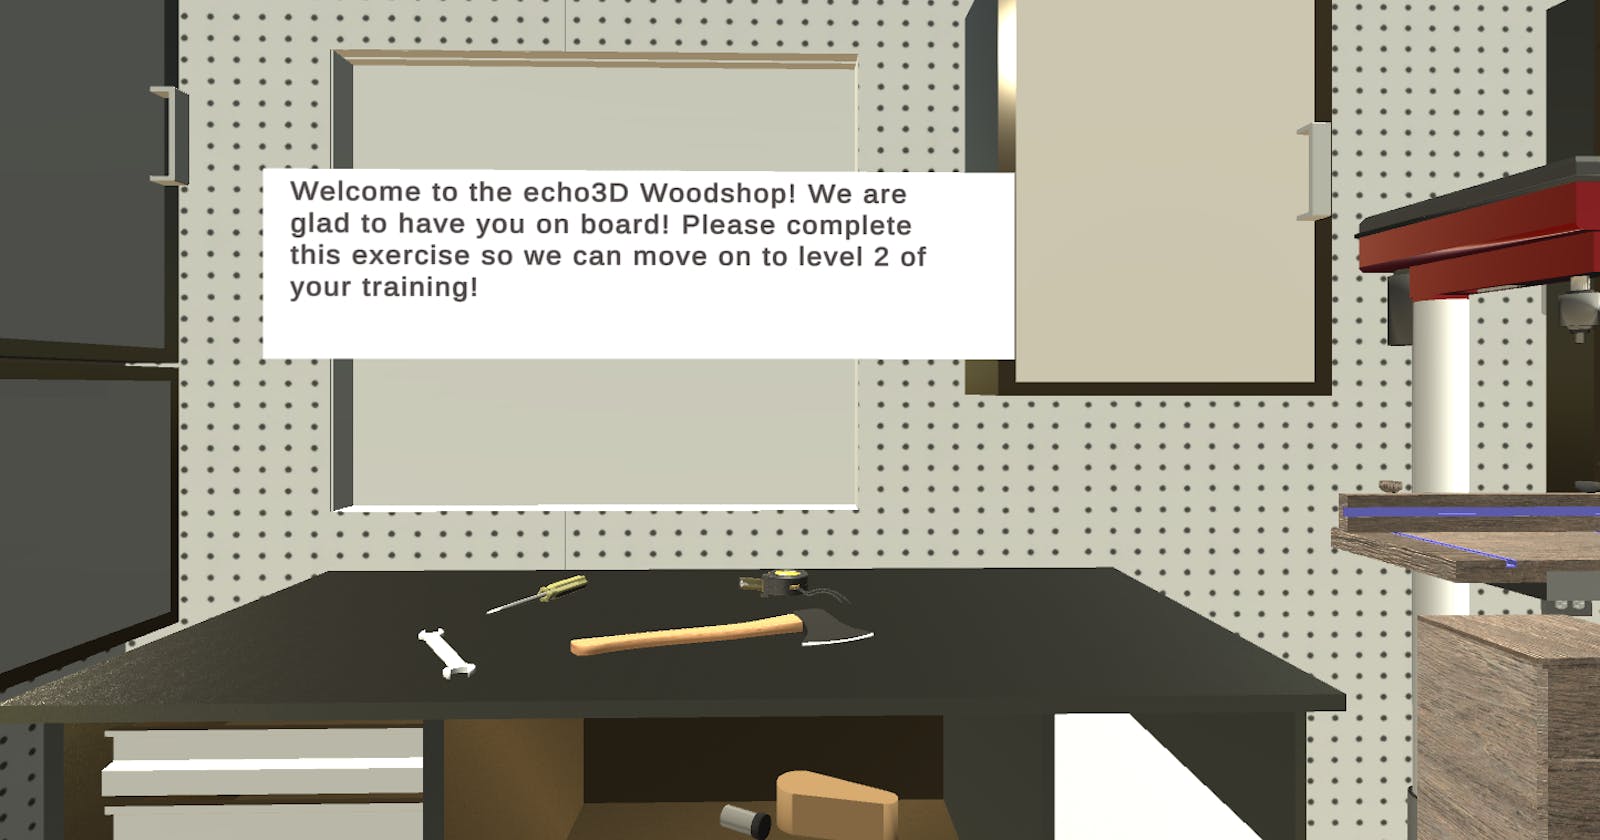 Manage 3D Tools on the Cloud in this Woodshop Training Demo (Unity Tutorial)